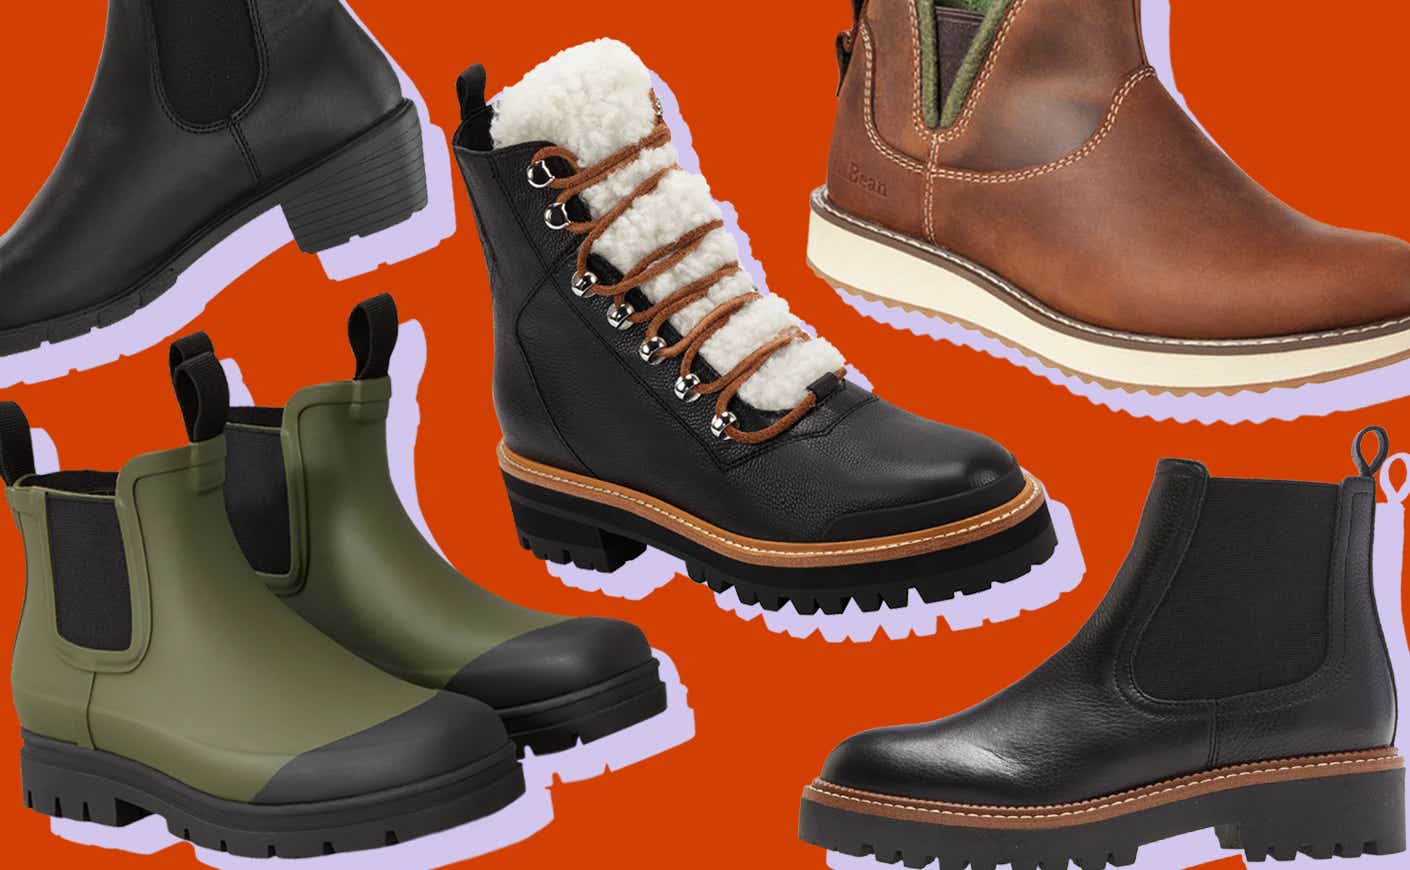 The 11 Best Winter and Rain Boots: Stylish Cute Snow Boots